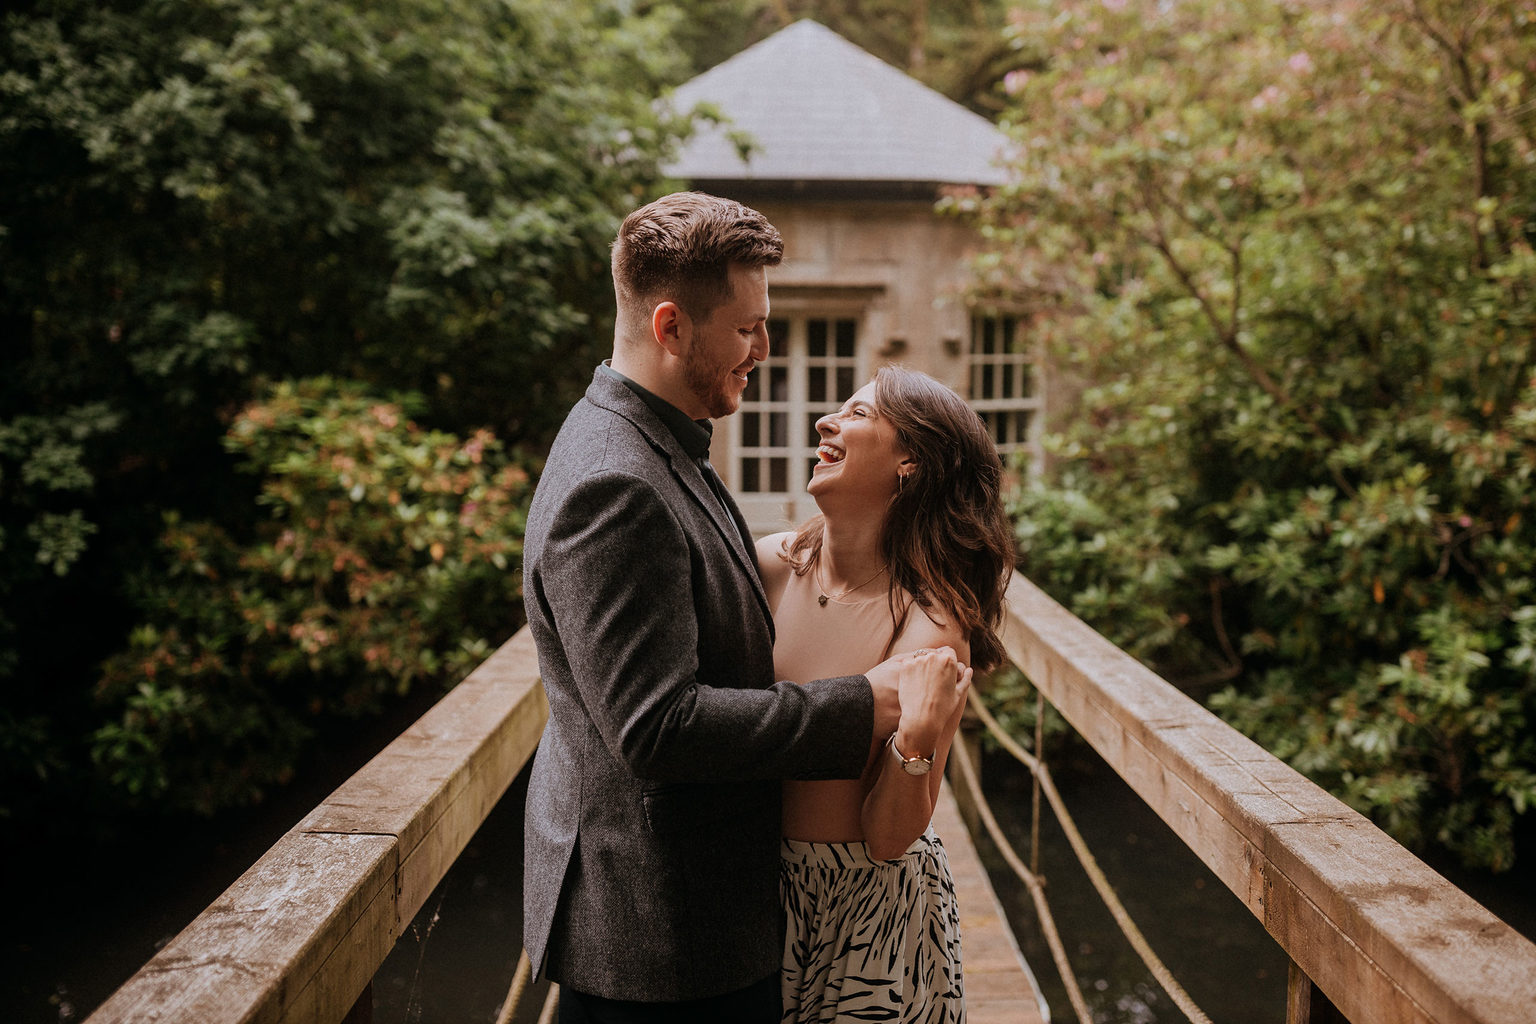 A happy couple embracing each other in front of the Lake House during a luxurious romantic wedding proposal at a venue in North Yorkshire. Photo by Peter Hugo.